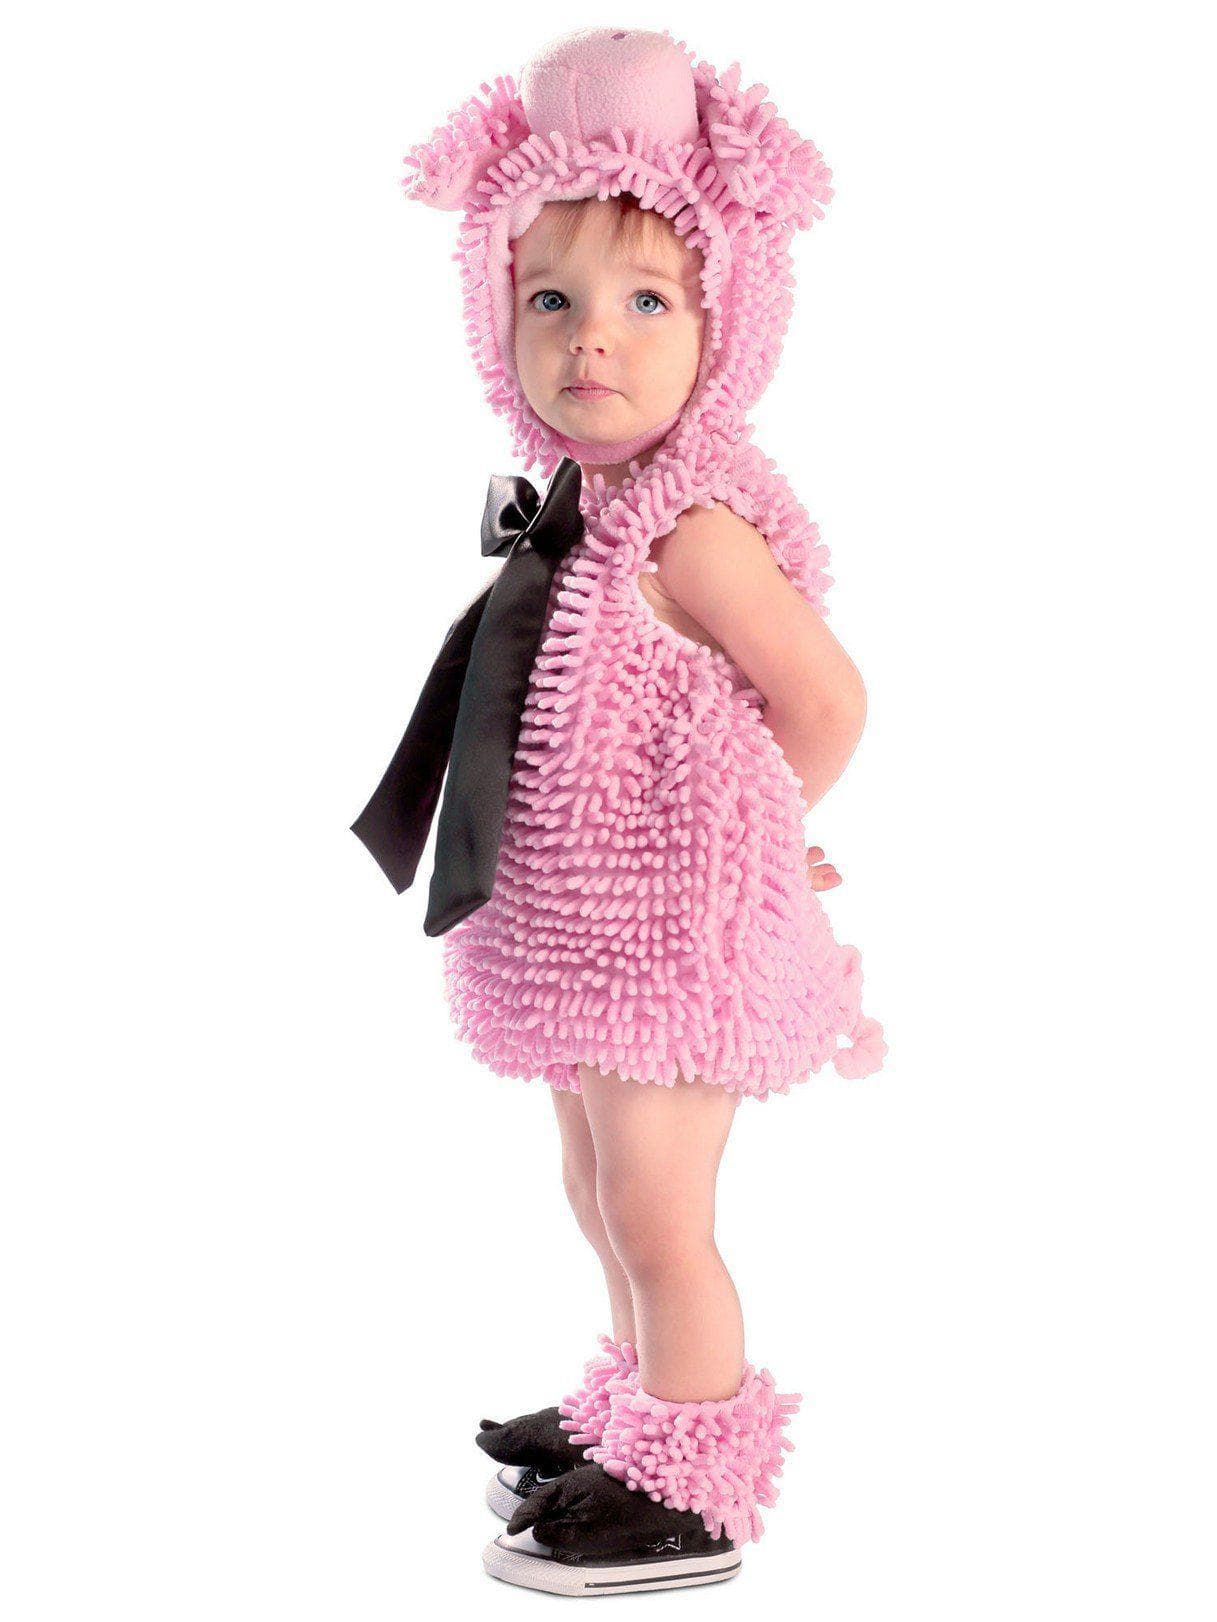 Baby/Toddler Squiggly Piggy With Feet Costume - costumes.com